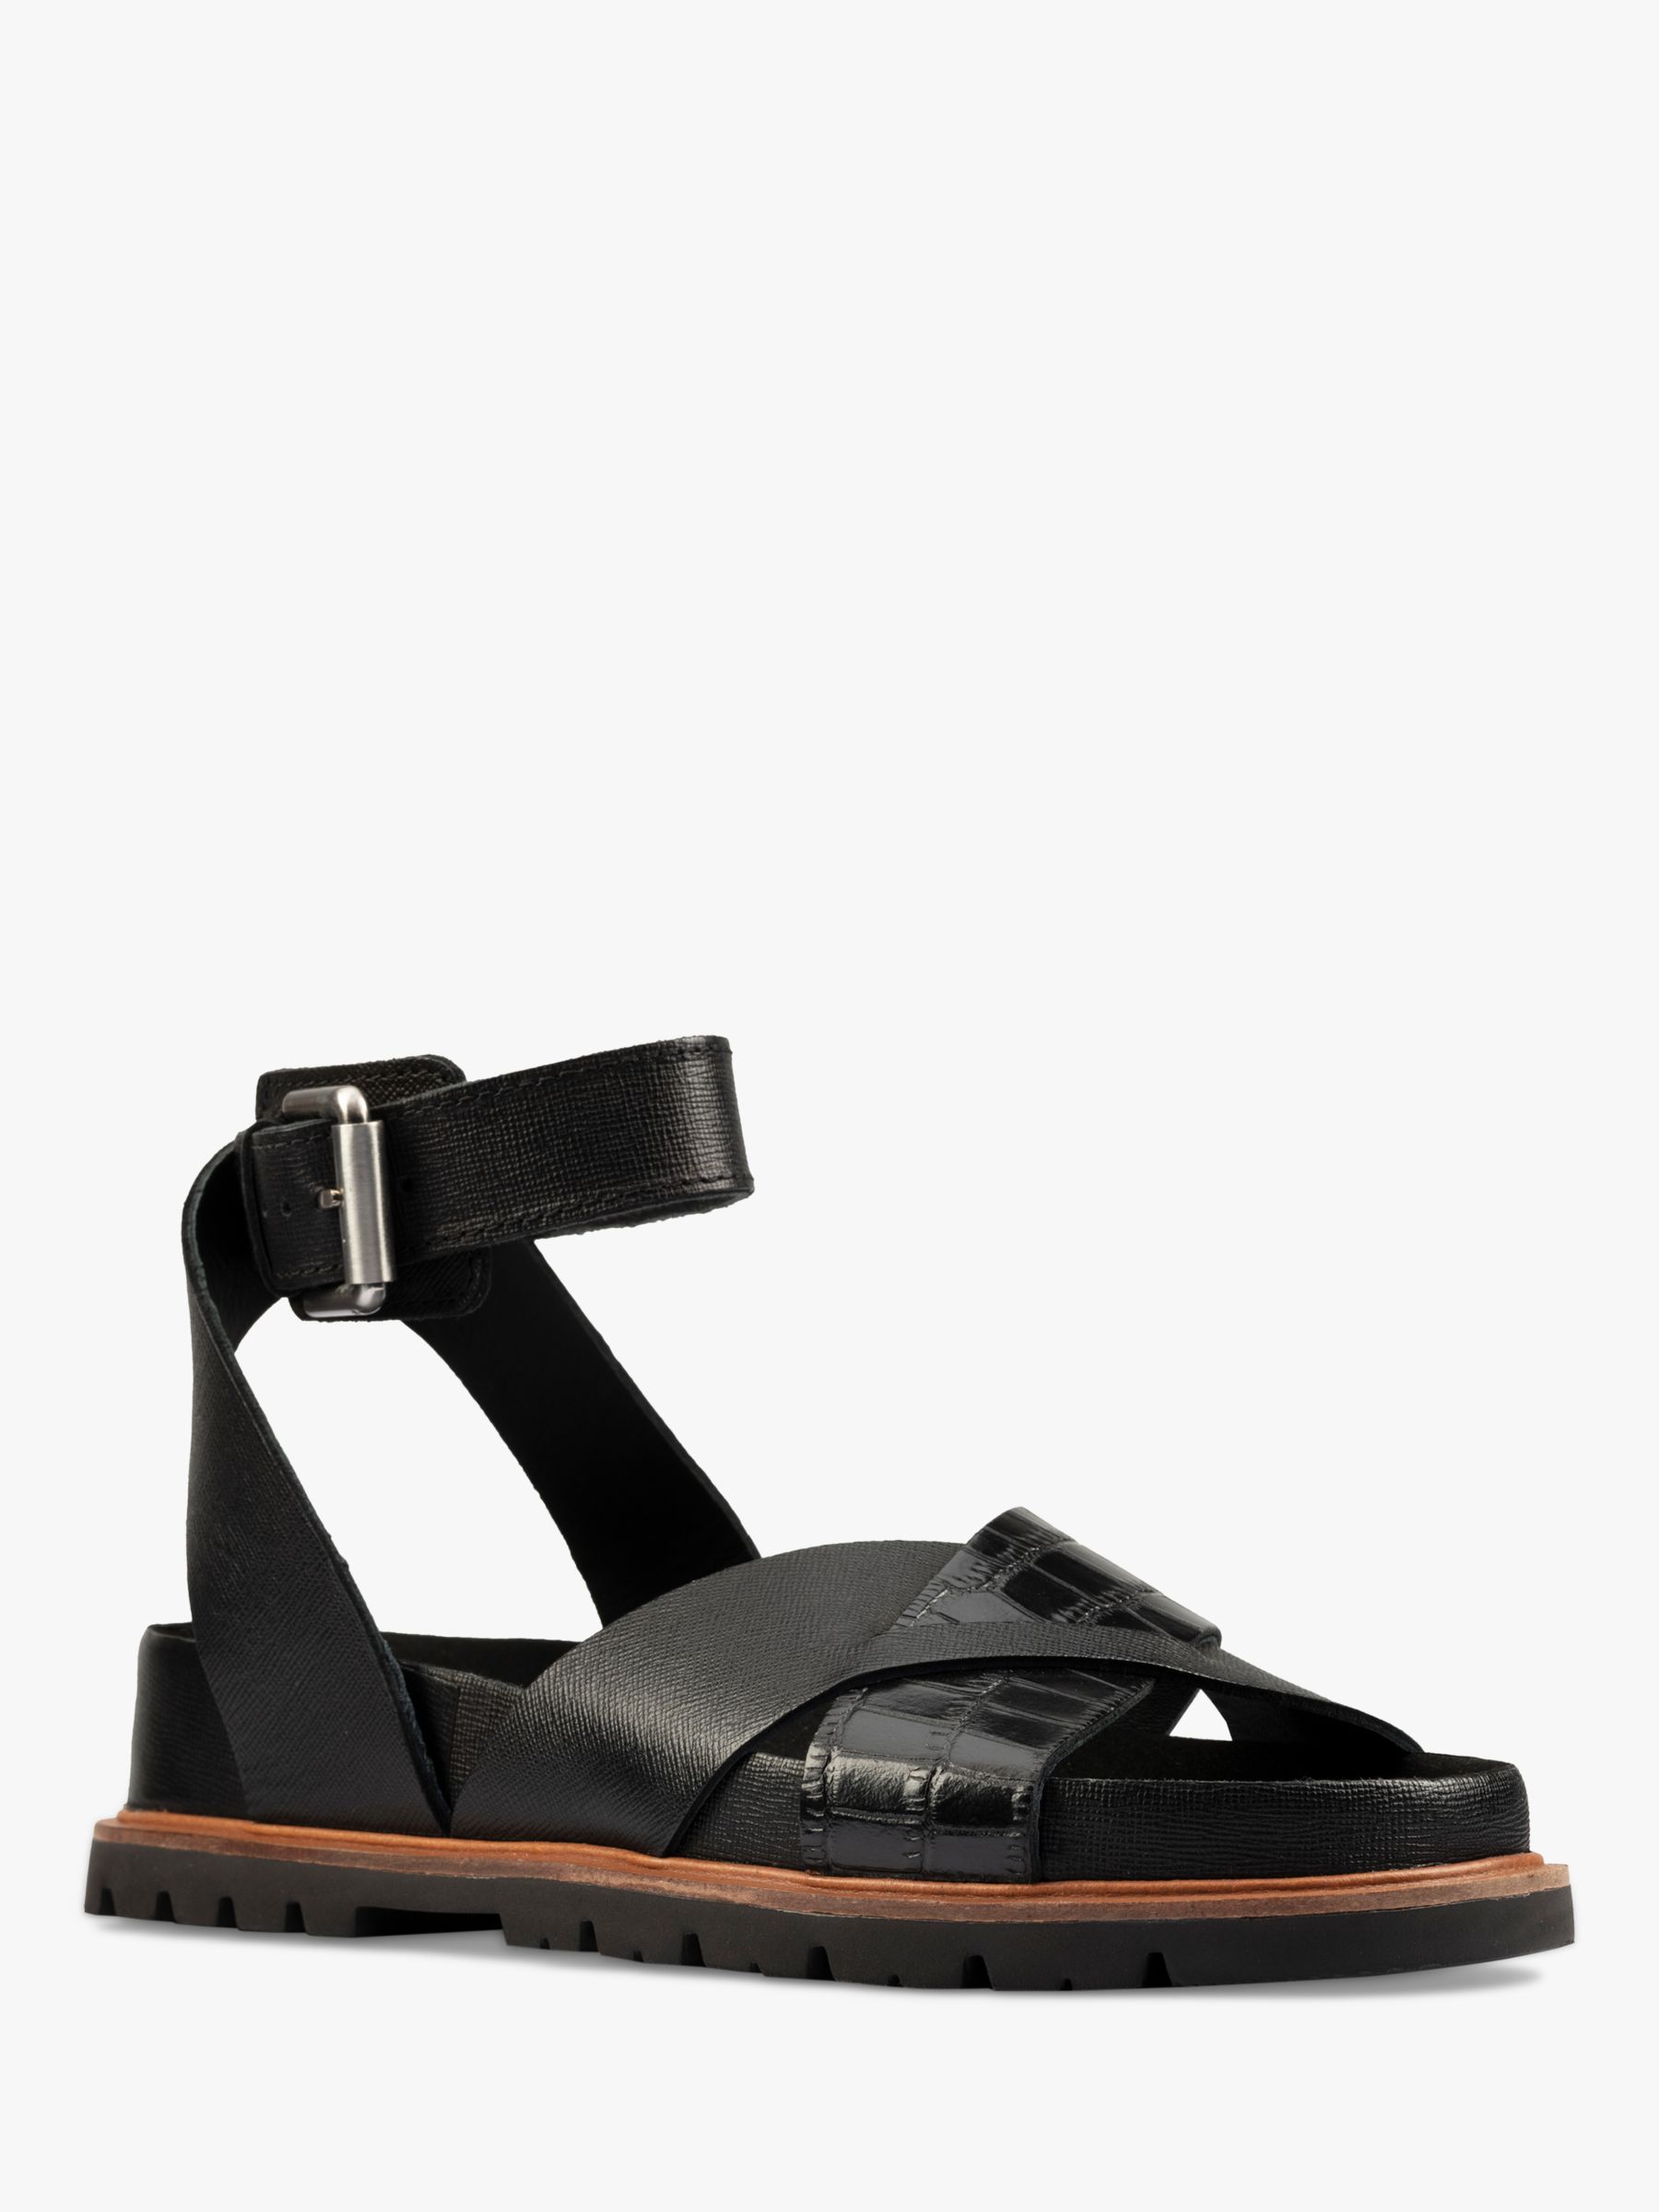 Clarks Orianna Cross Over Leather Sandals, Black at John Lewis & Partners